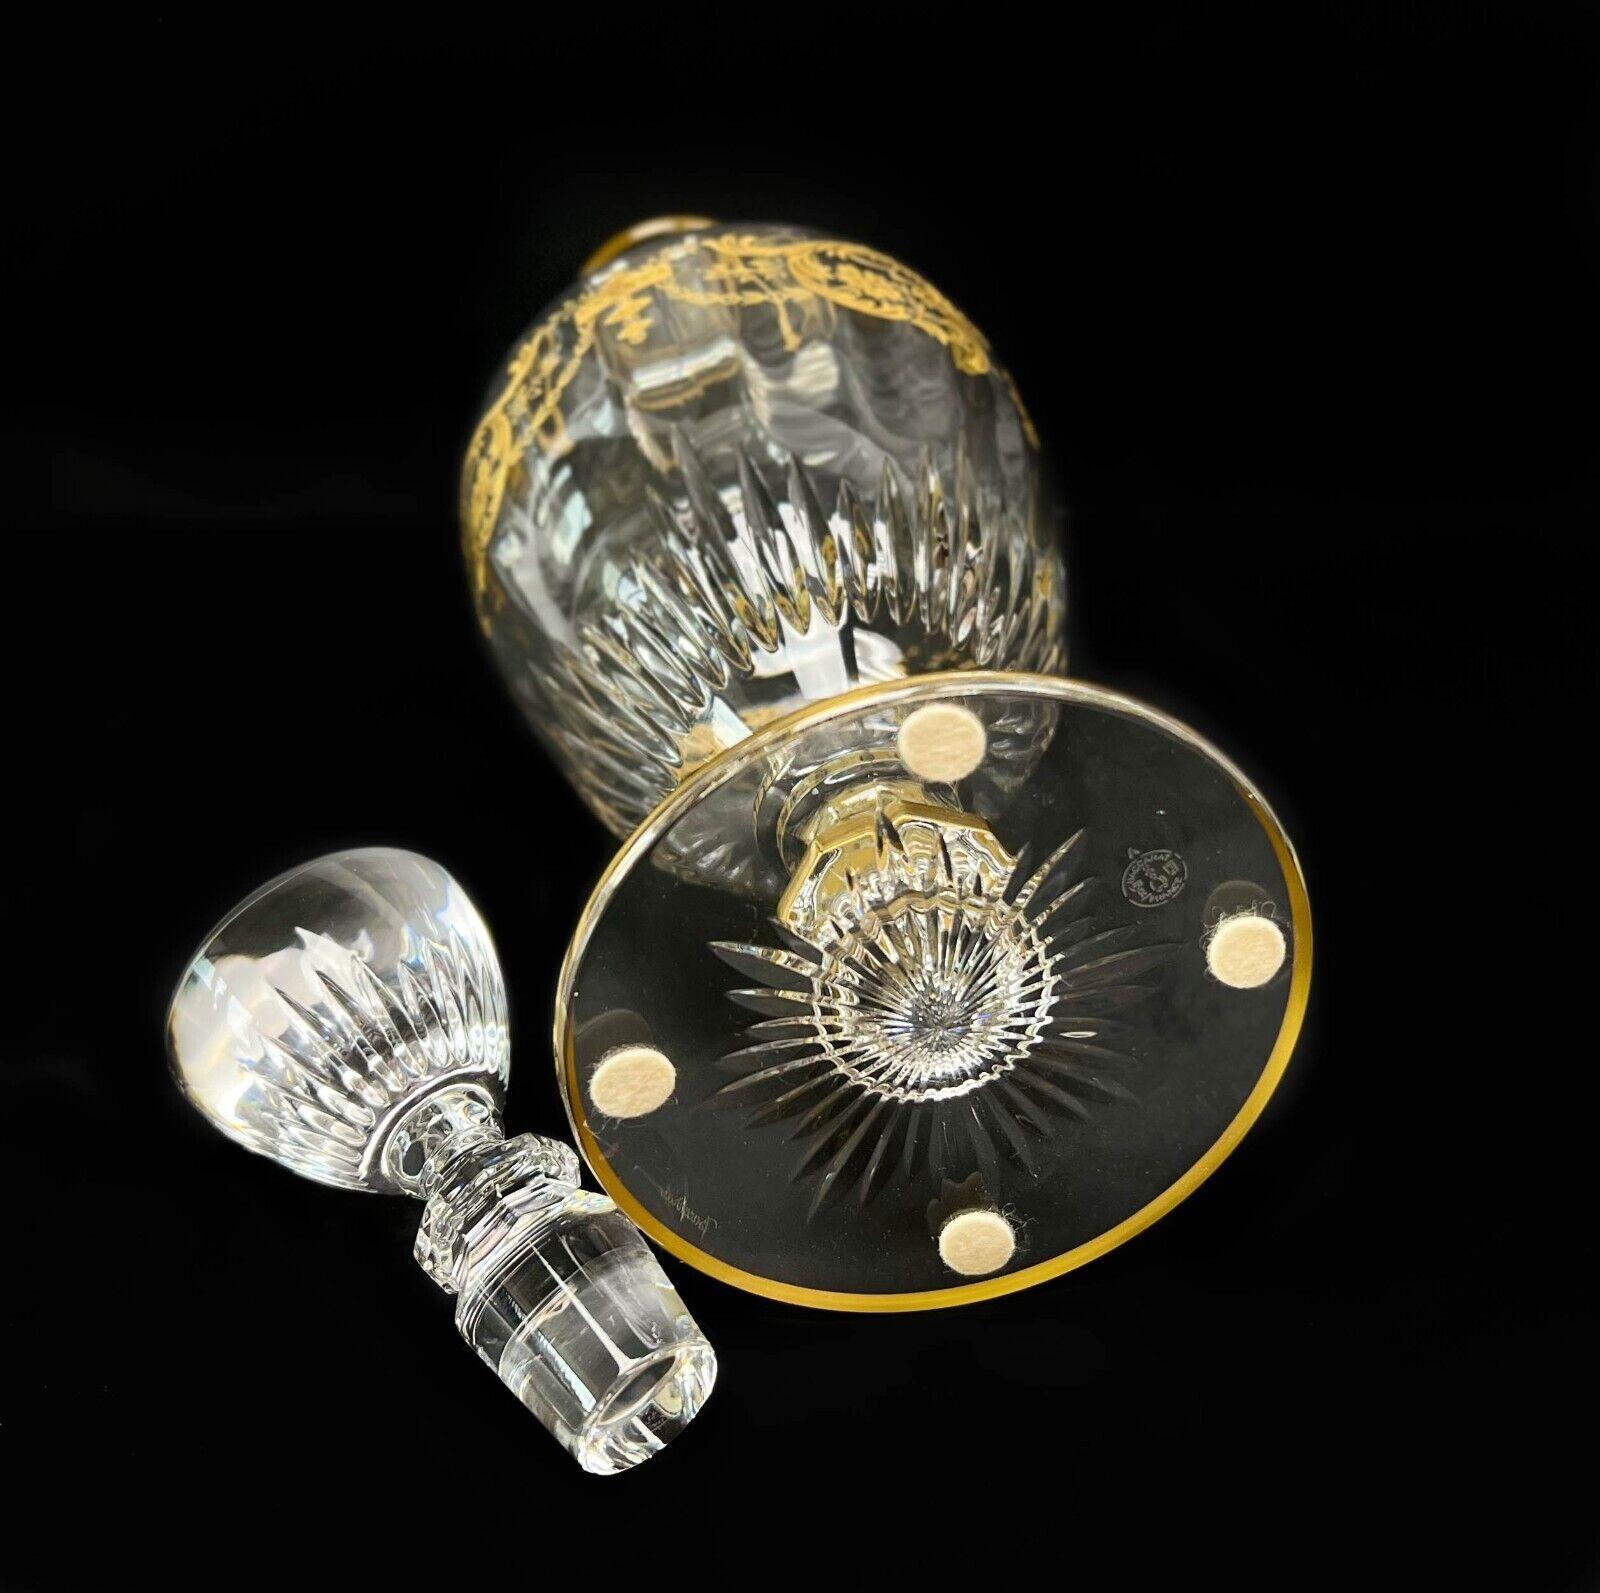 French Baccarat France Crystal Glass Decanter in Imperator Gilt Gold Scrolls